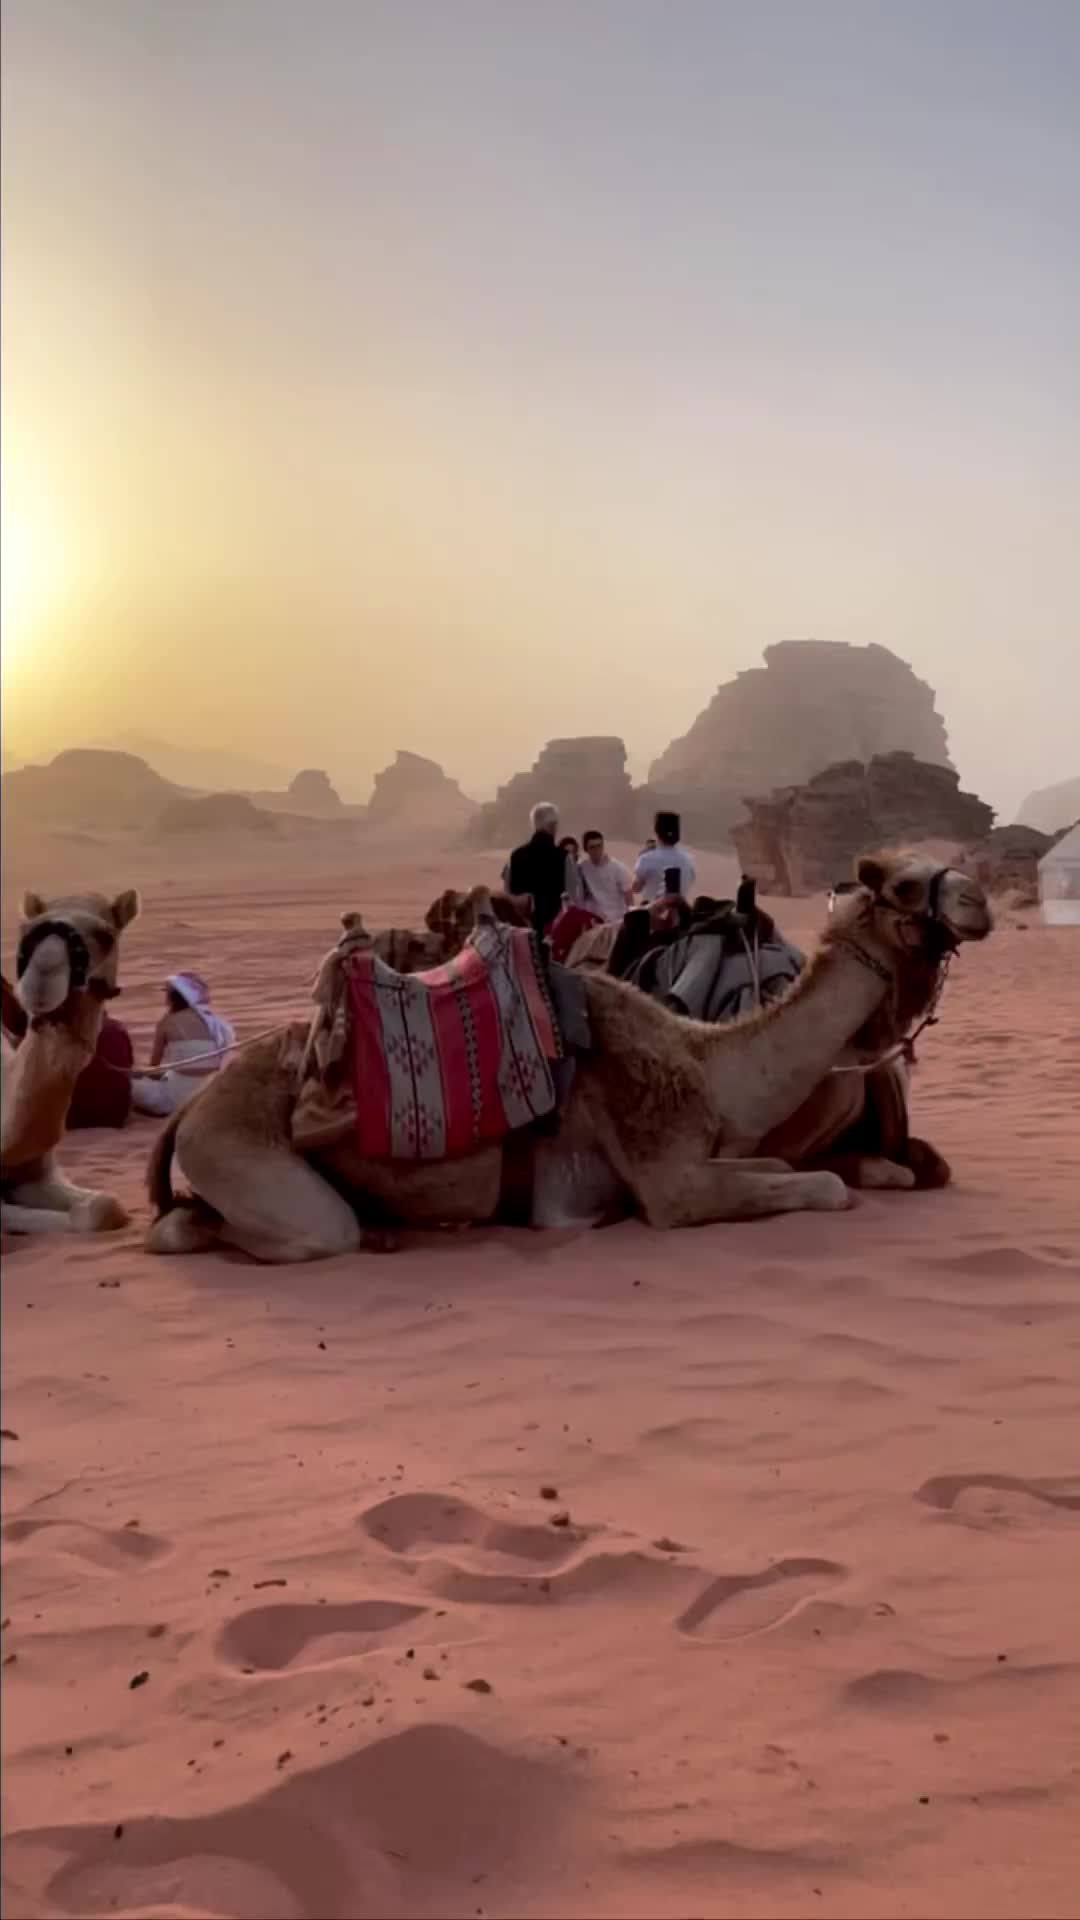 Spectacular Sunset in Wadi Rum Desert with Cute Camels